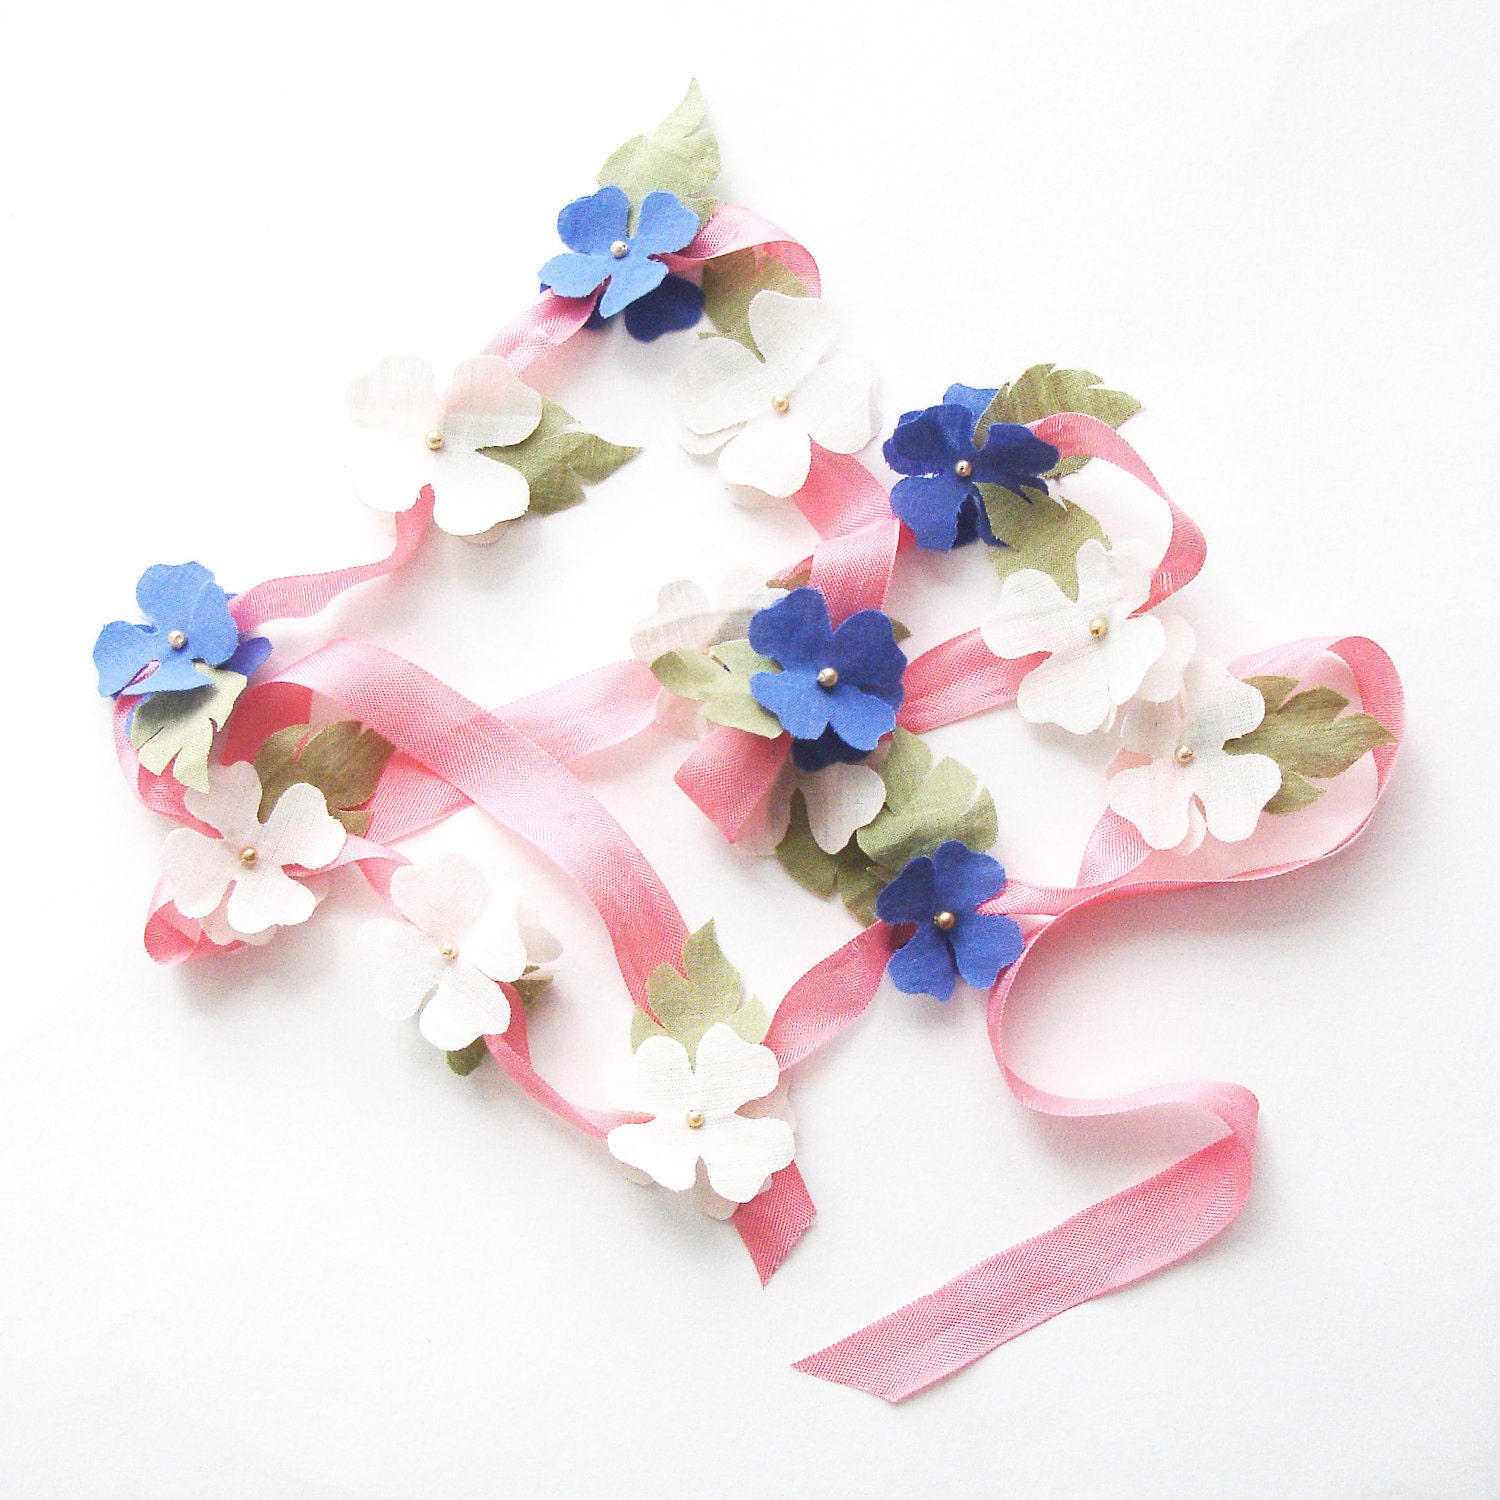 Fabric Flower Garland in fairtrade organic cotton and vintage ribbon - pink/ivory/indigo